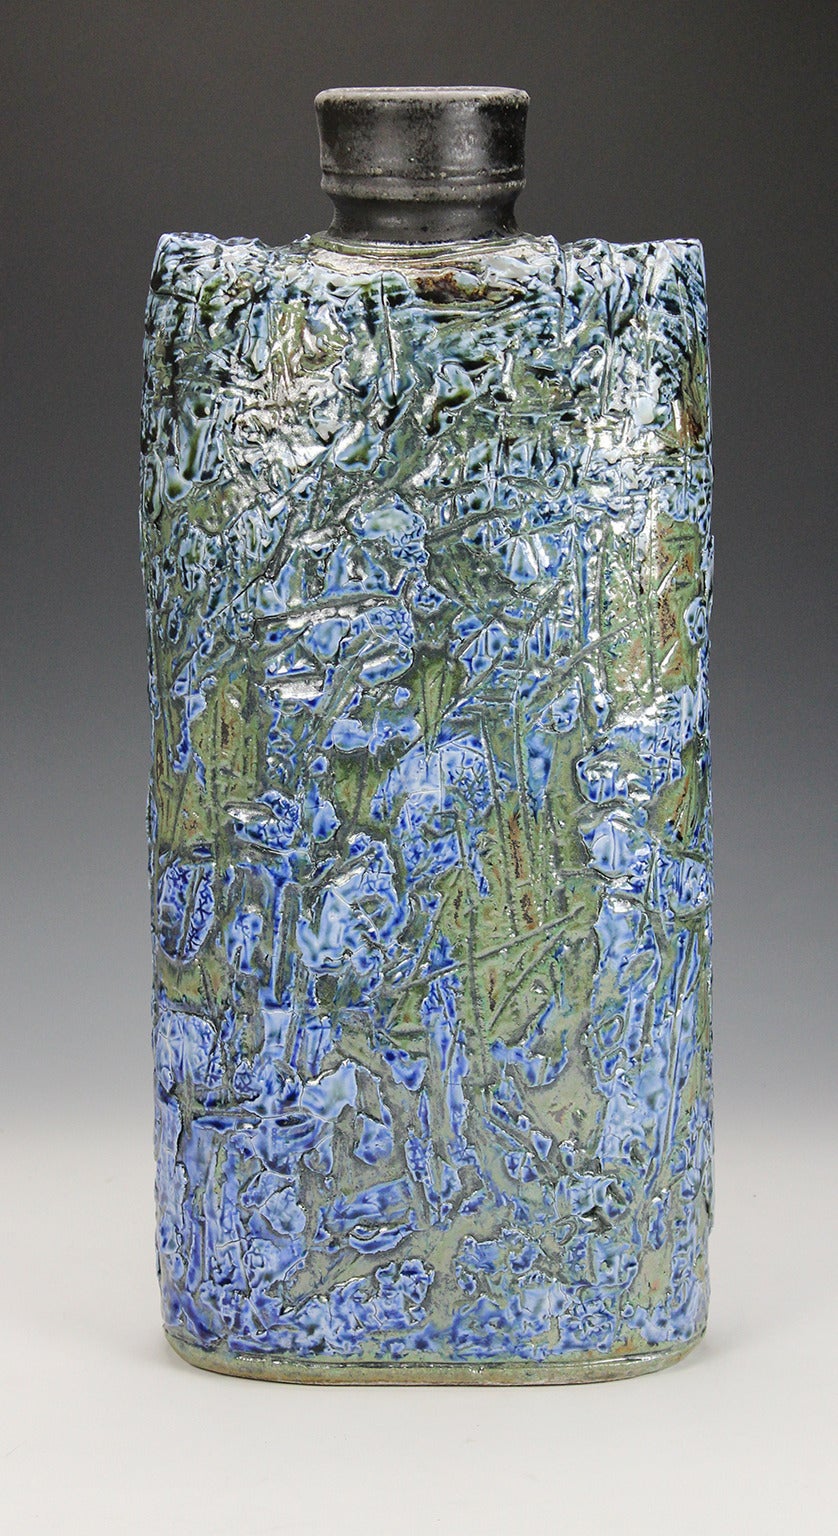 Regis Brodie Abstract Sculpture - Blue Green Form